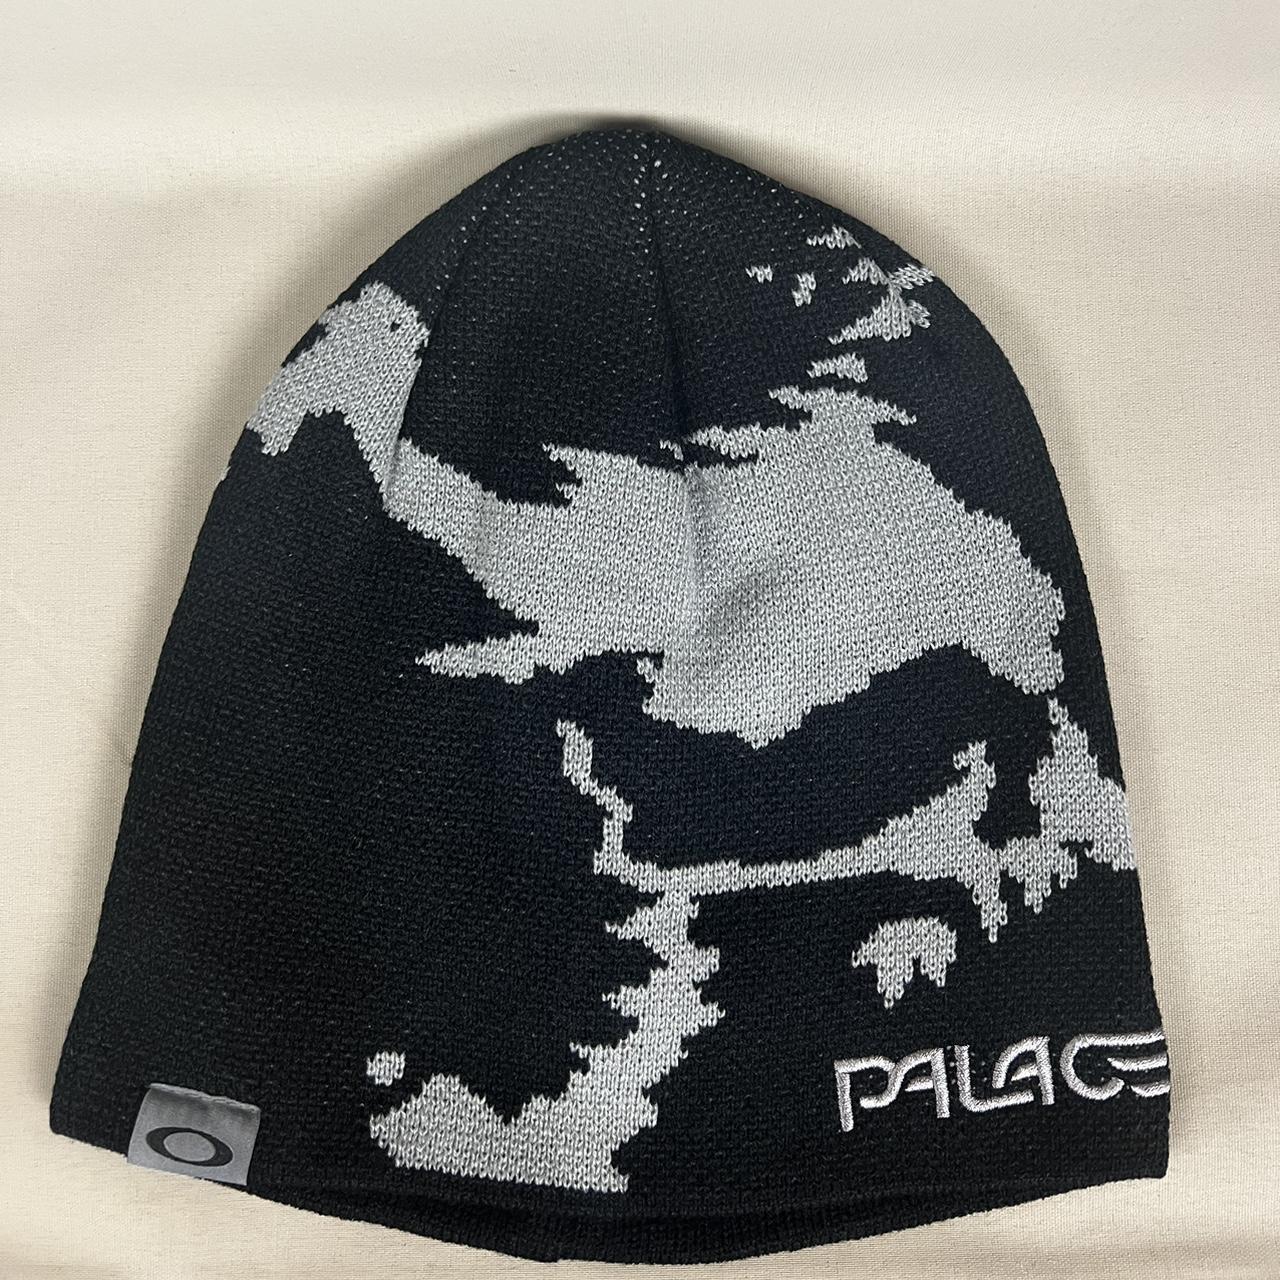 Palace x Oakley Skull Beanie, One Size, Black and...